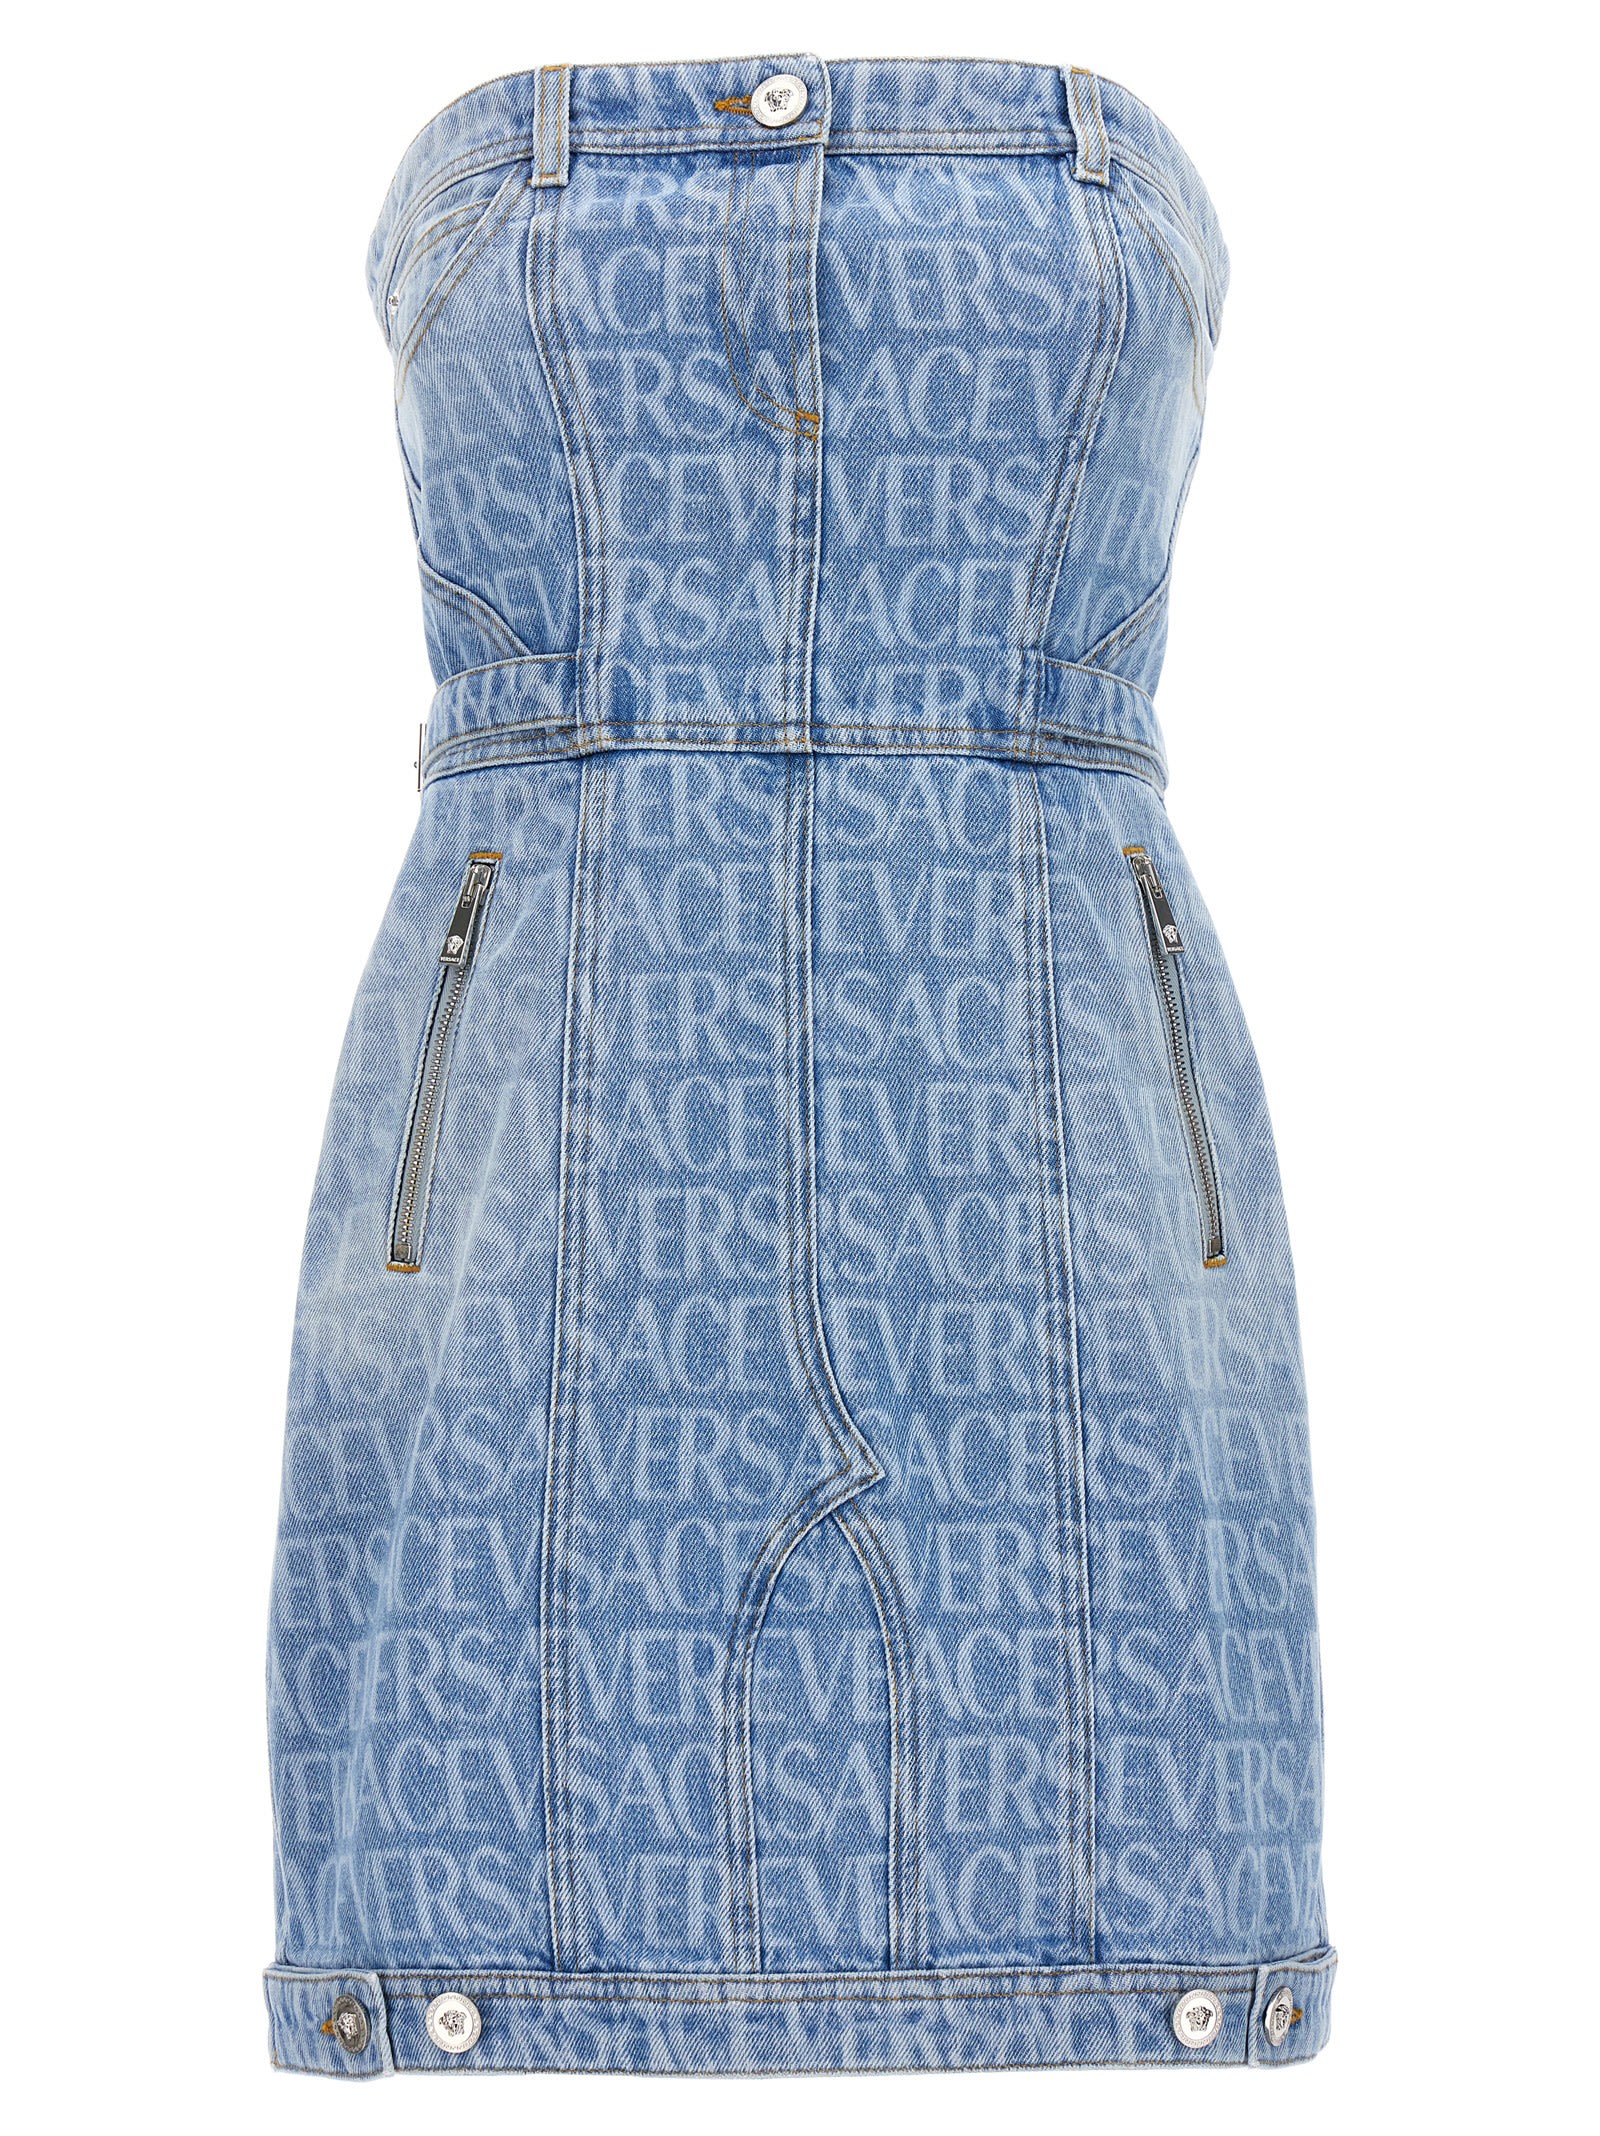 Denim Dress From la Vacanza Collection